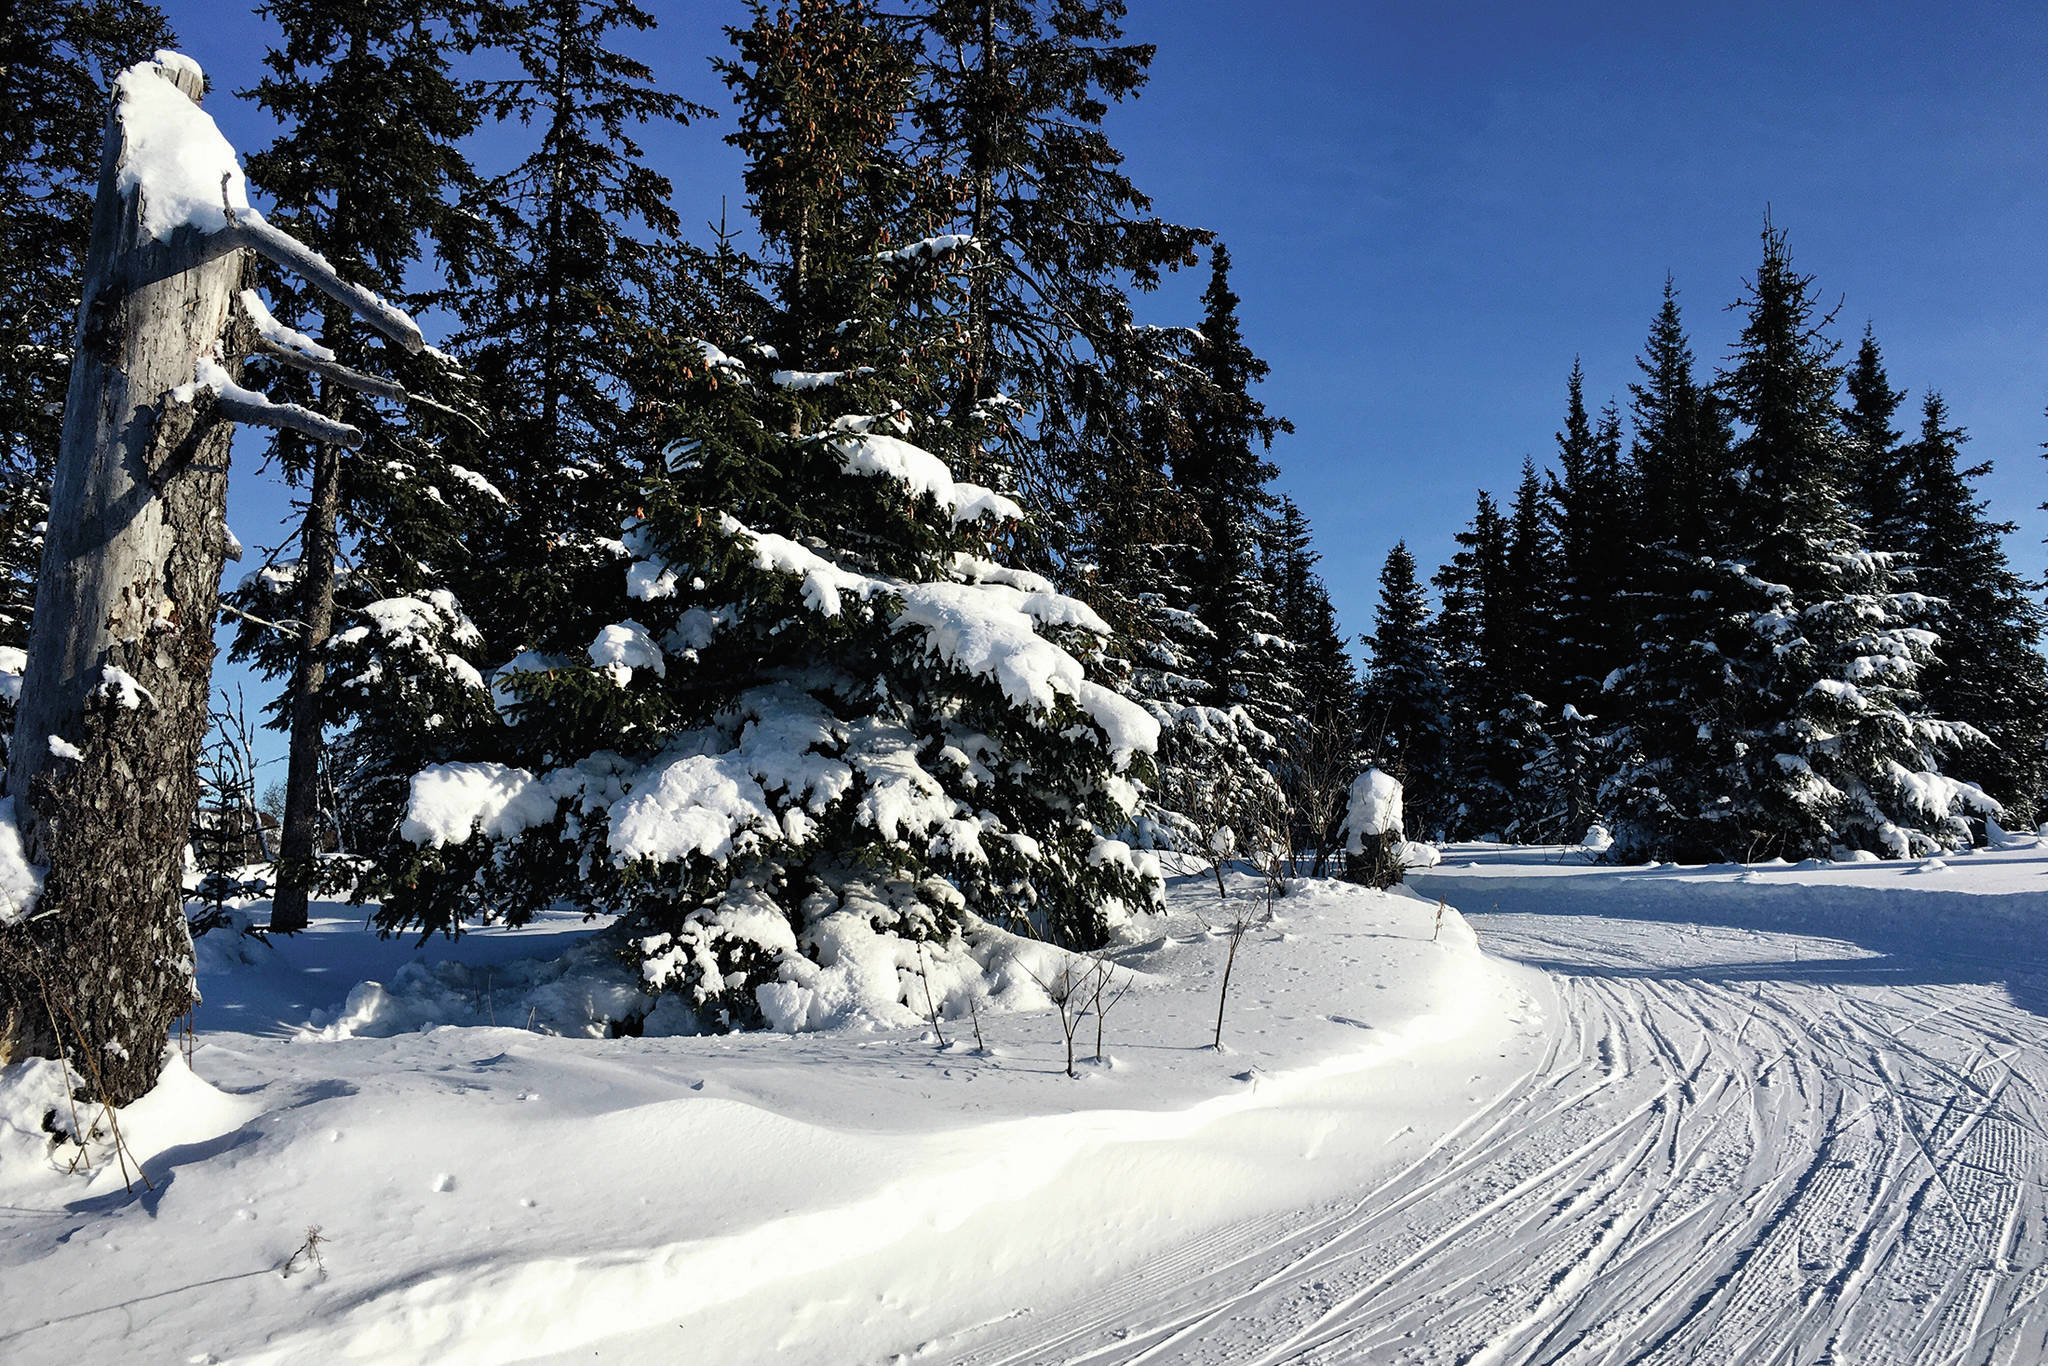 Sun shines on the trails on the Hayfield Loop at the Lookout Mountain Trails on Monday, Feb. 24, 2020 during a bluebird day on Ohlson Mountain Road near Homer, Alaska. (Photo by Megan Pacer/Homer News)